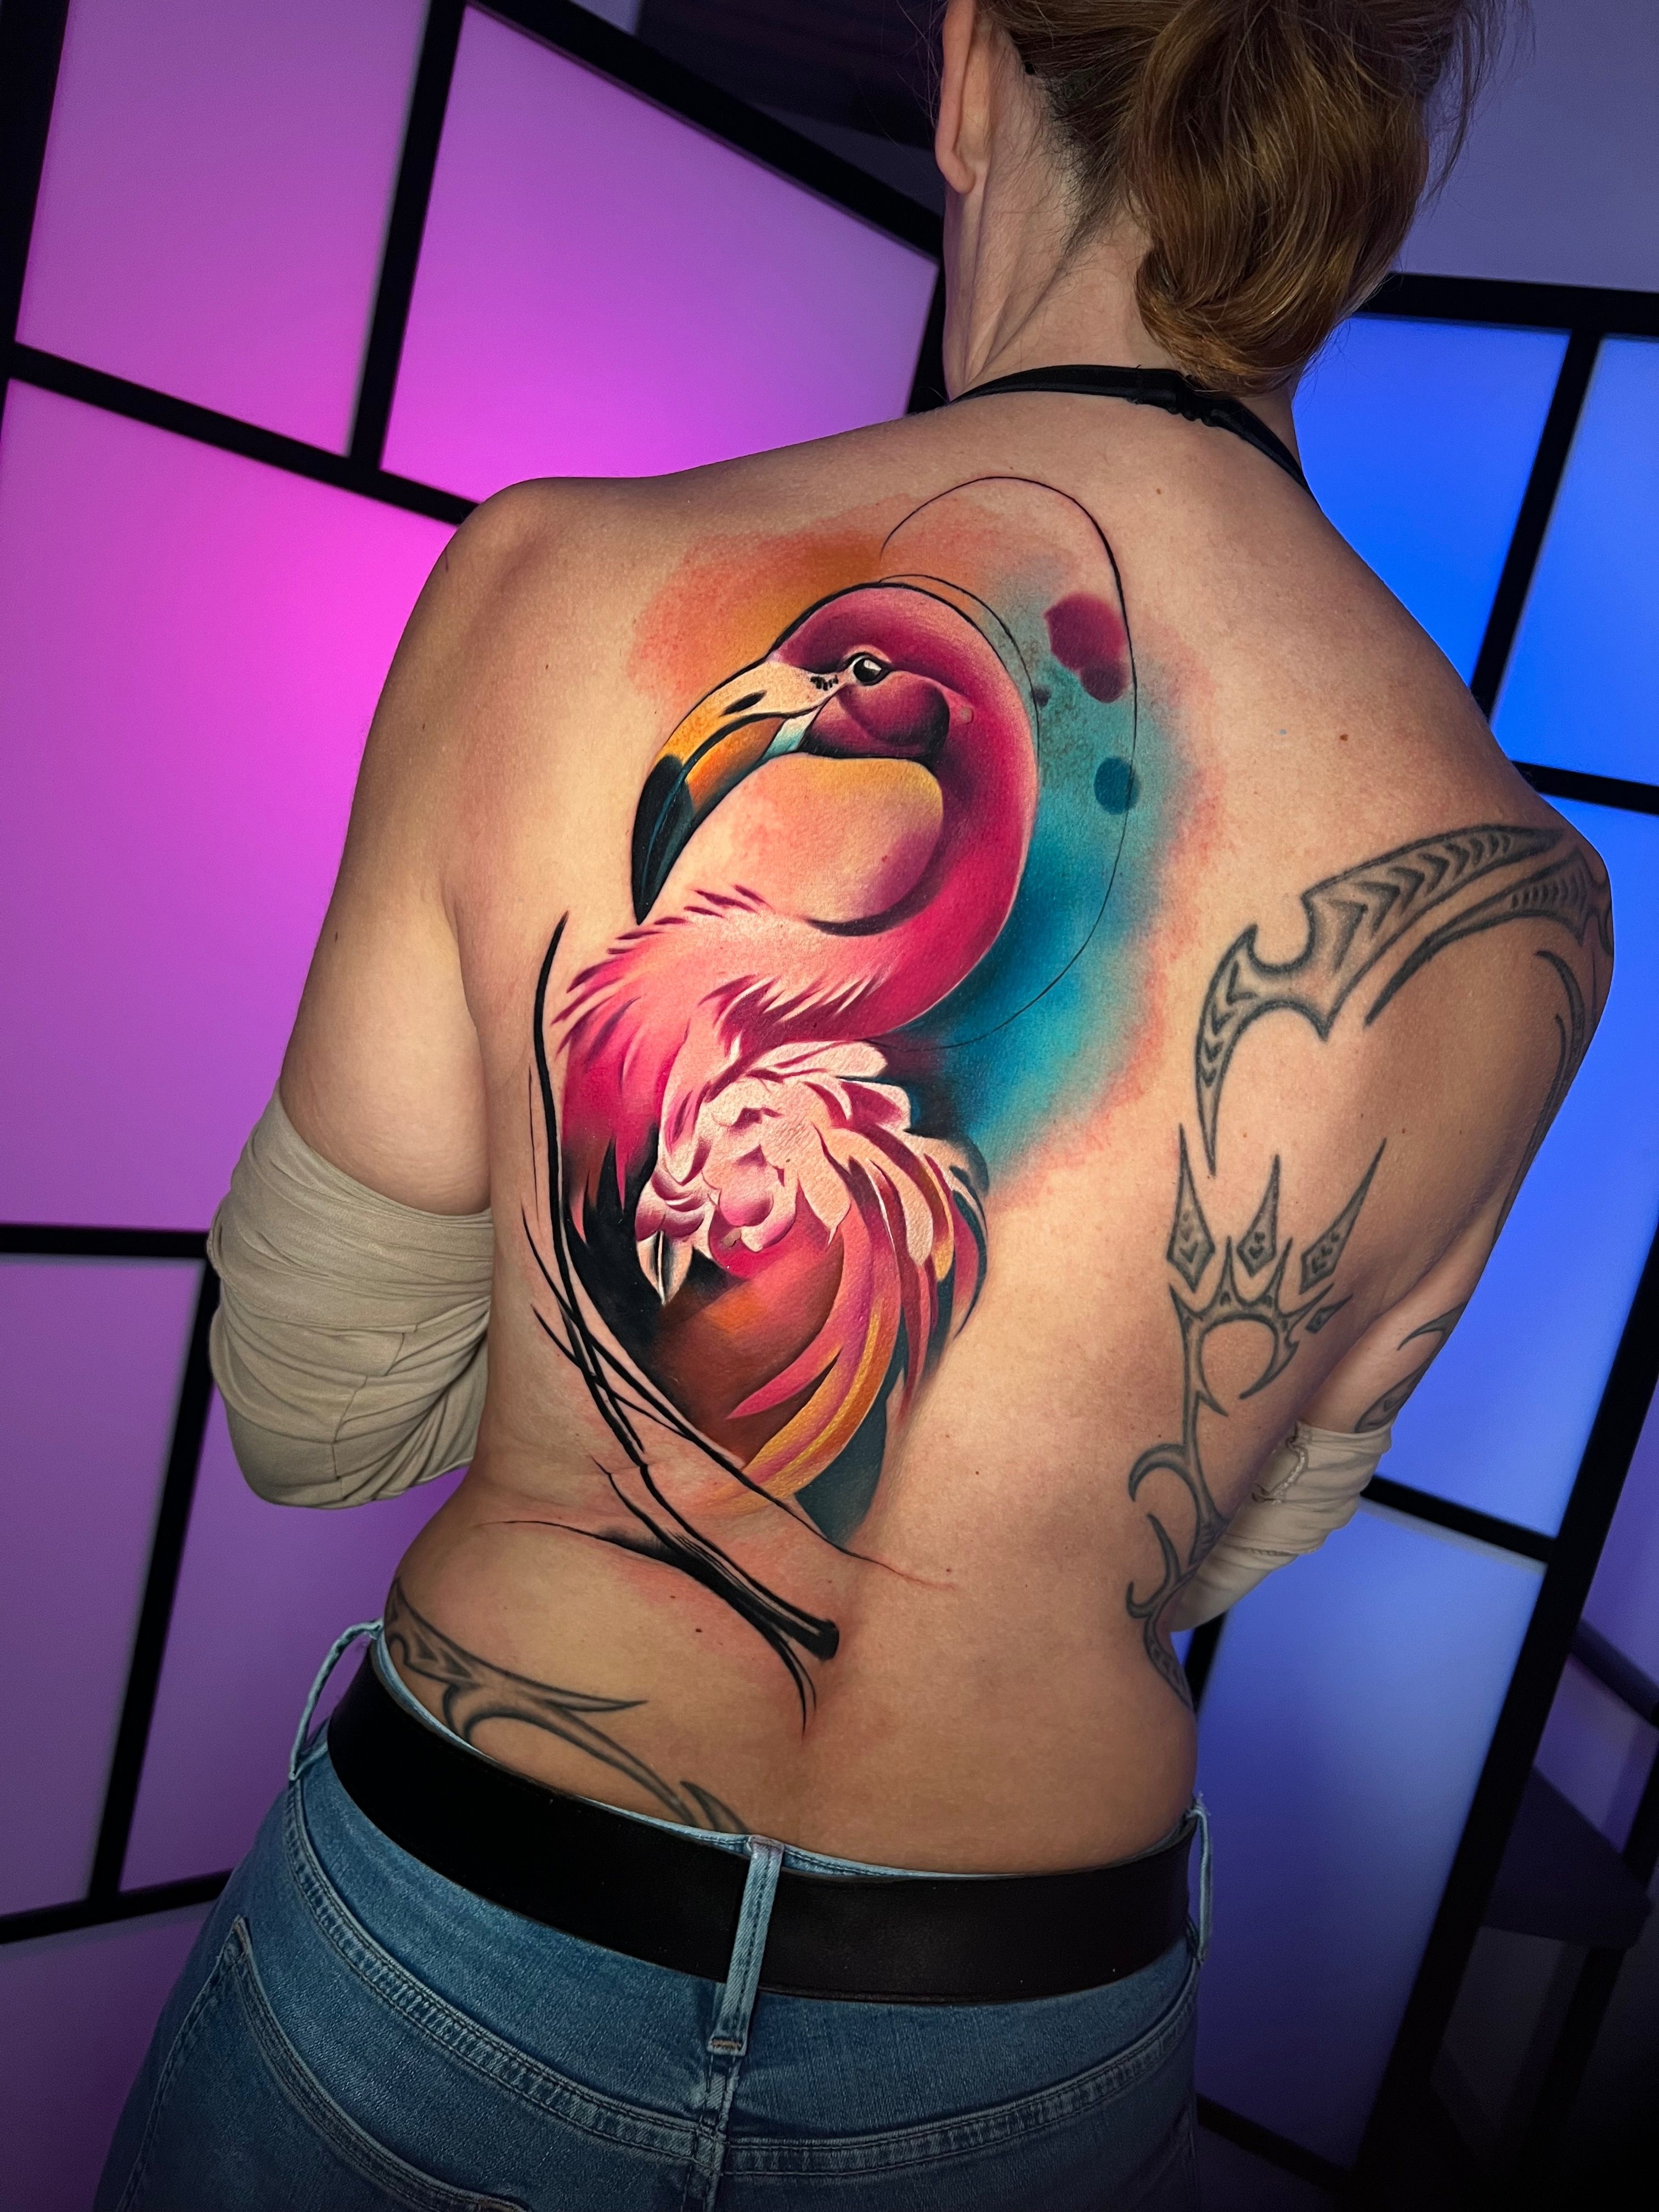 Flamingo Tattoos: A Dive into Their Meaning and Design | Art and Design